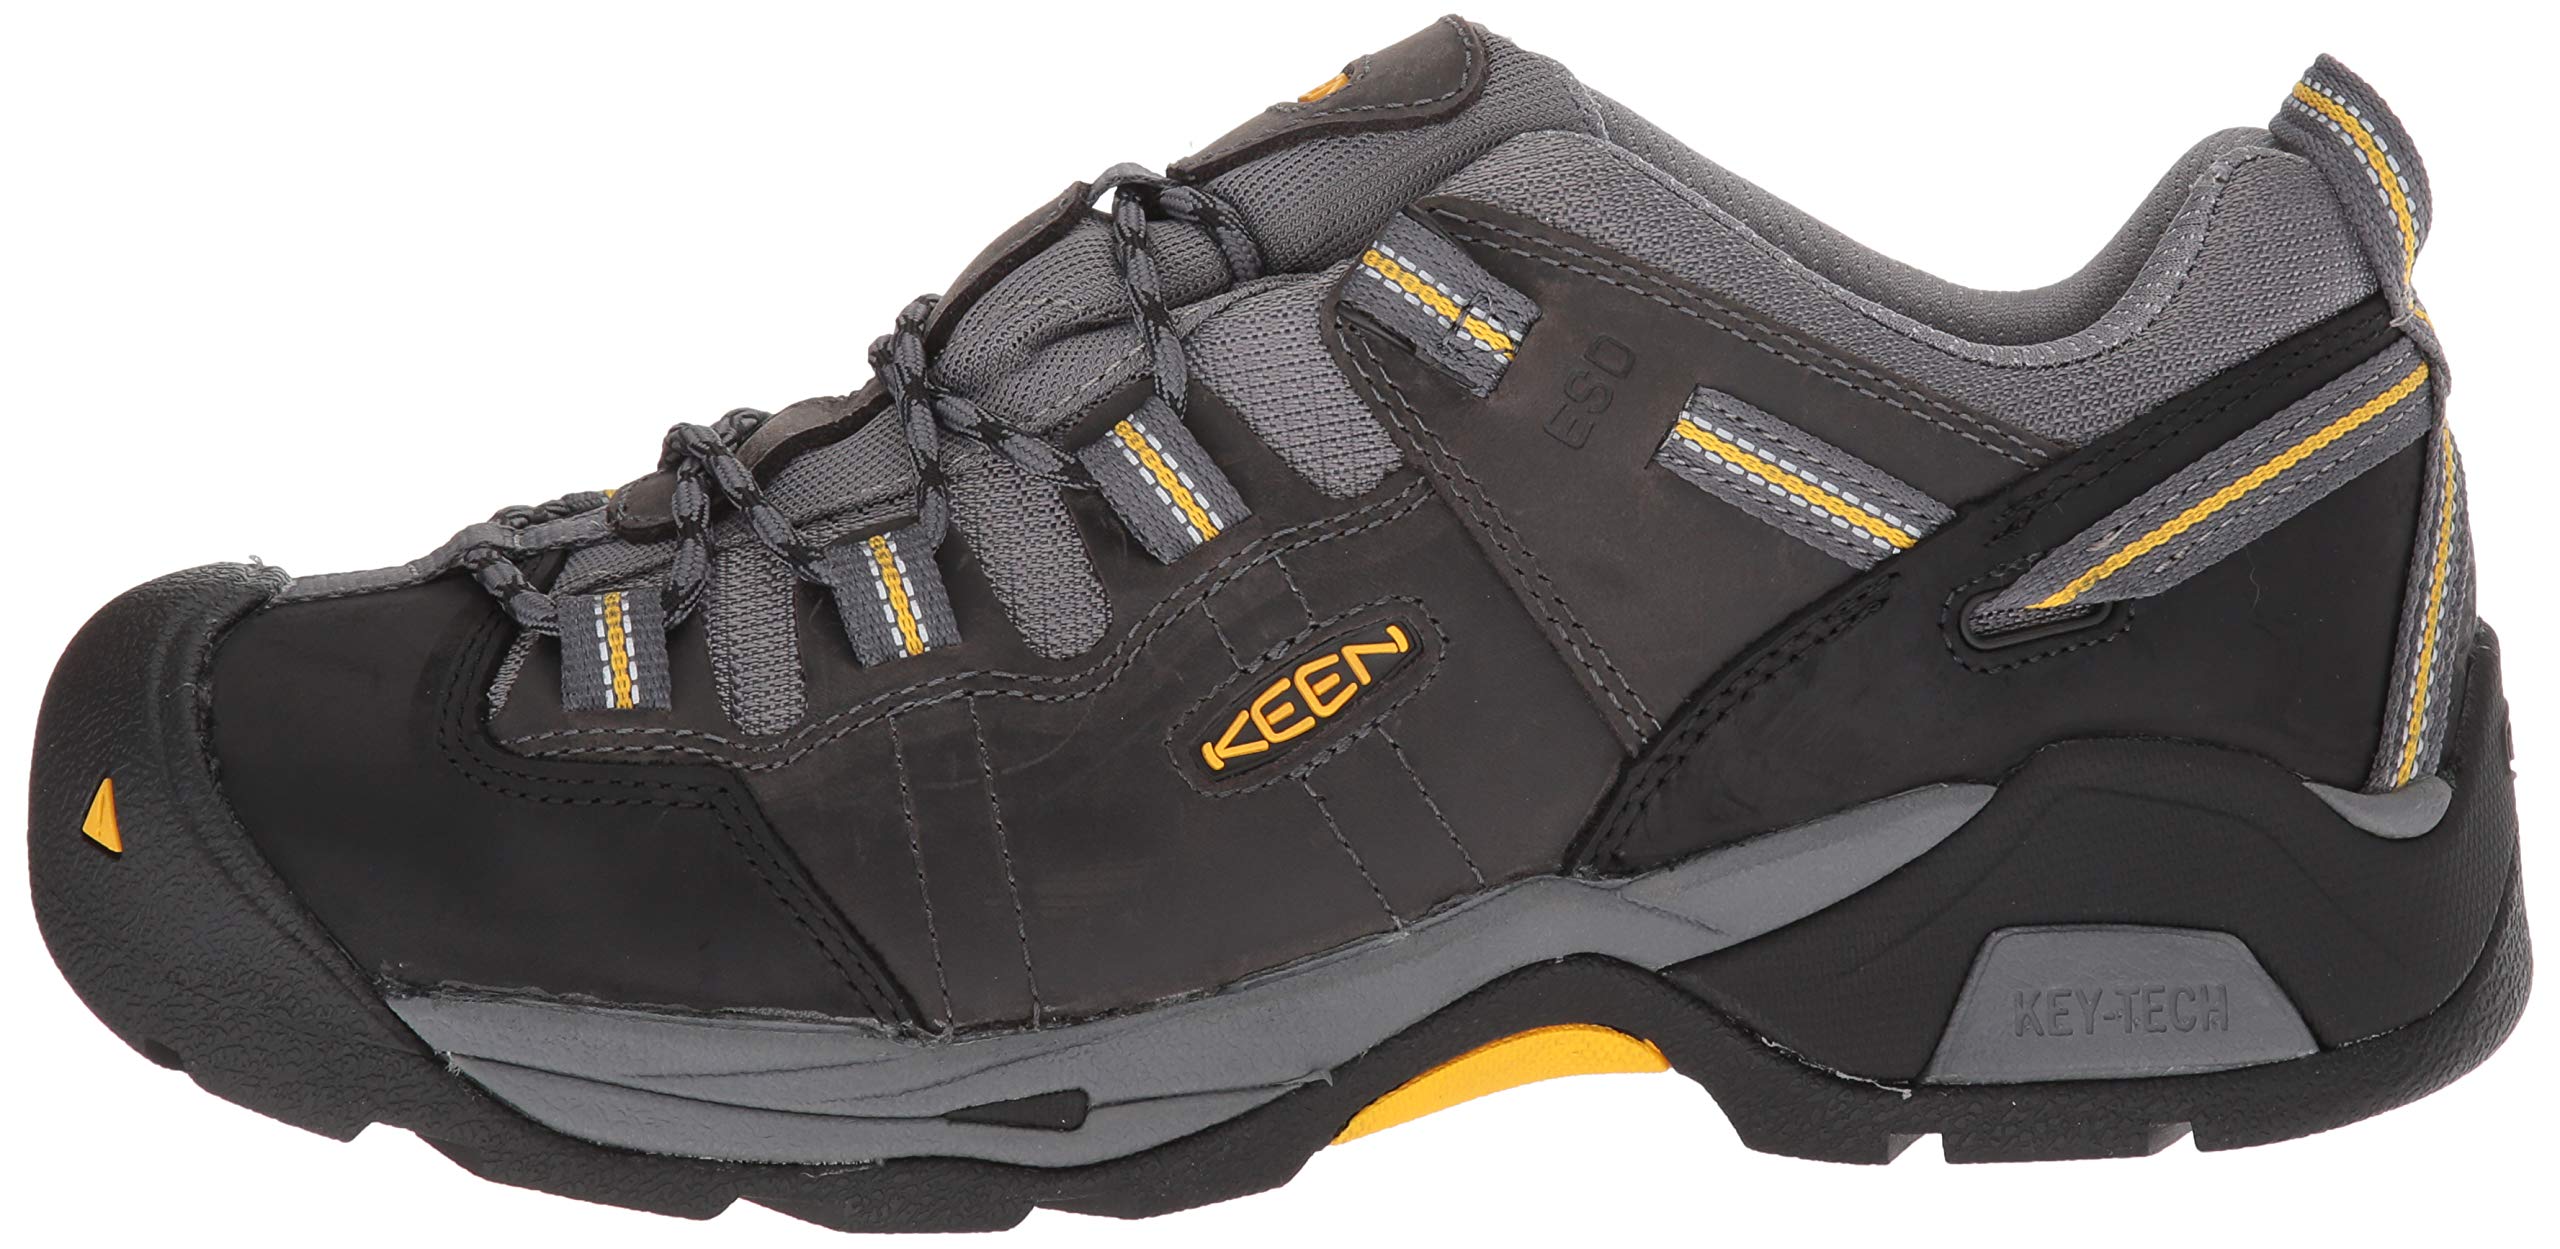 KEEN Utility Men's Detroit Xt ESD Low Height Leather Soft Toe Work Shoes